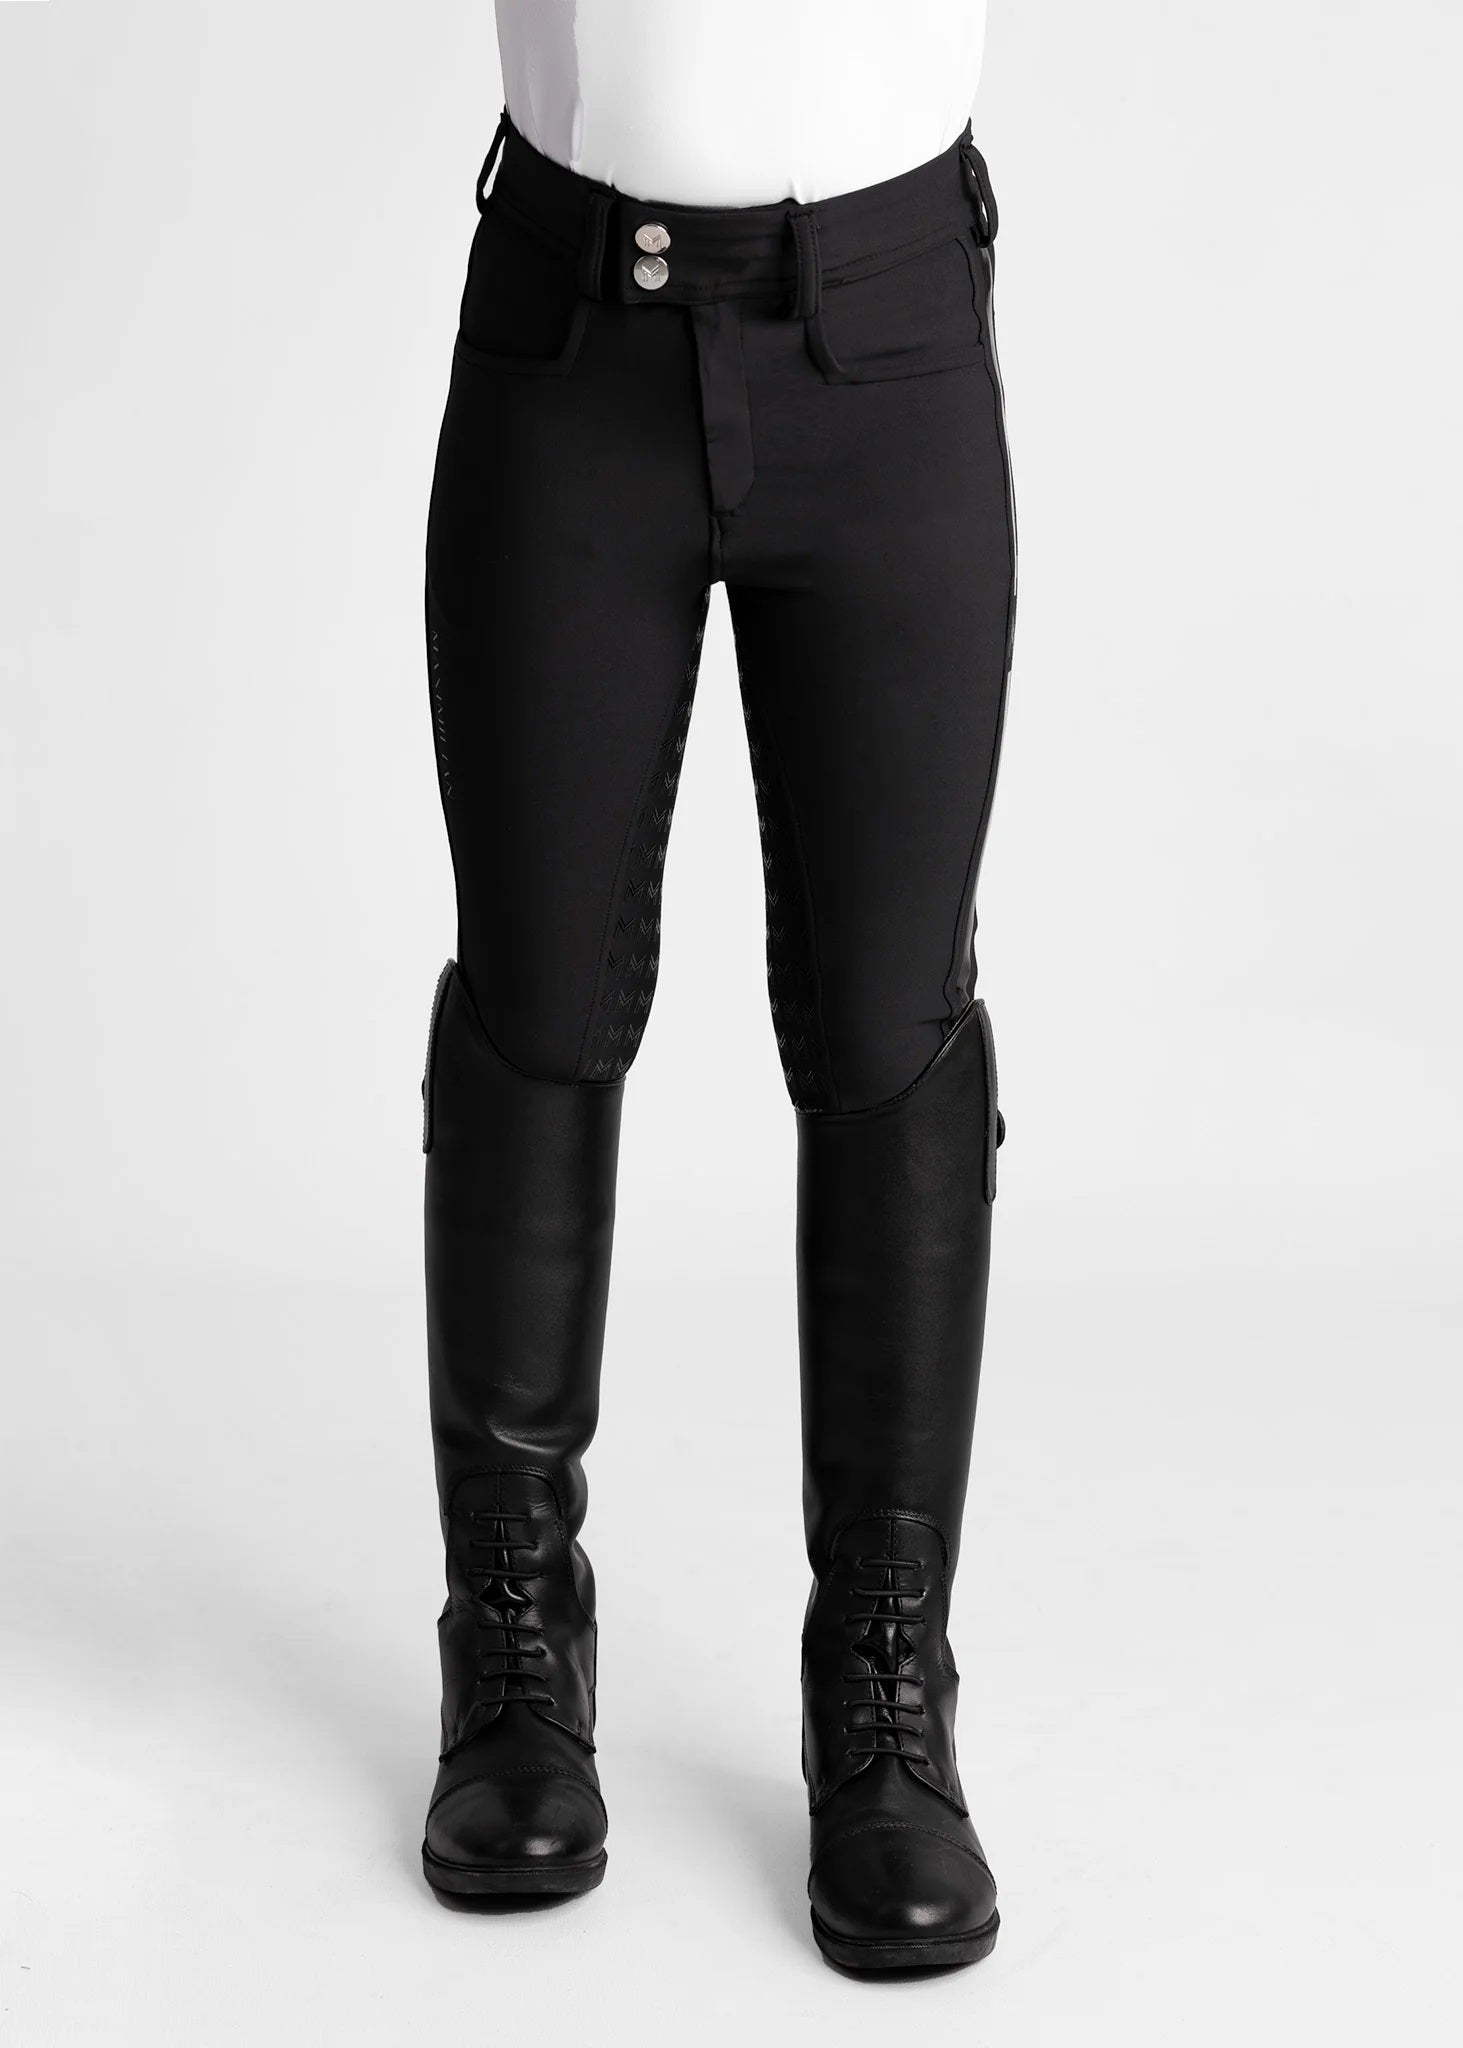 Young Riders - Reflection Breeches - Black